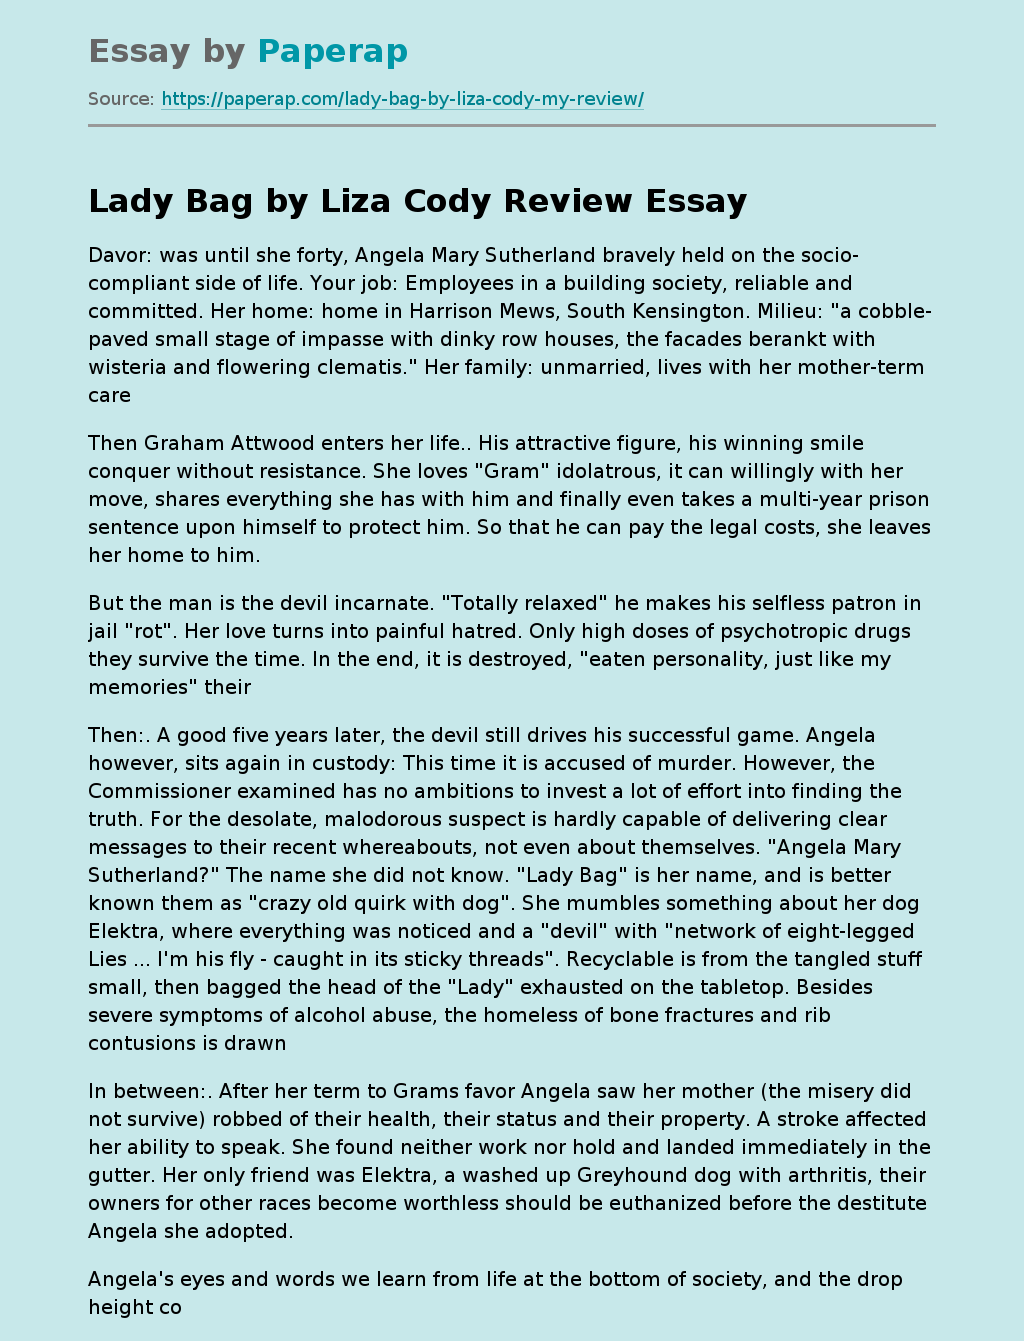 Lady Bag by Liza Cody Review